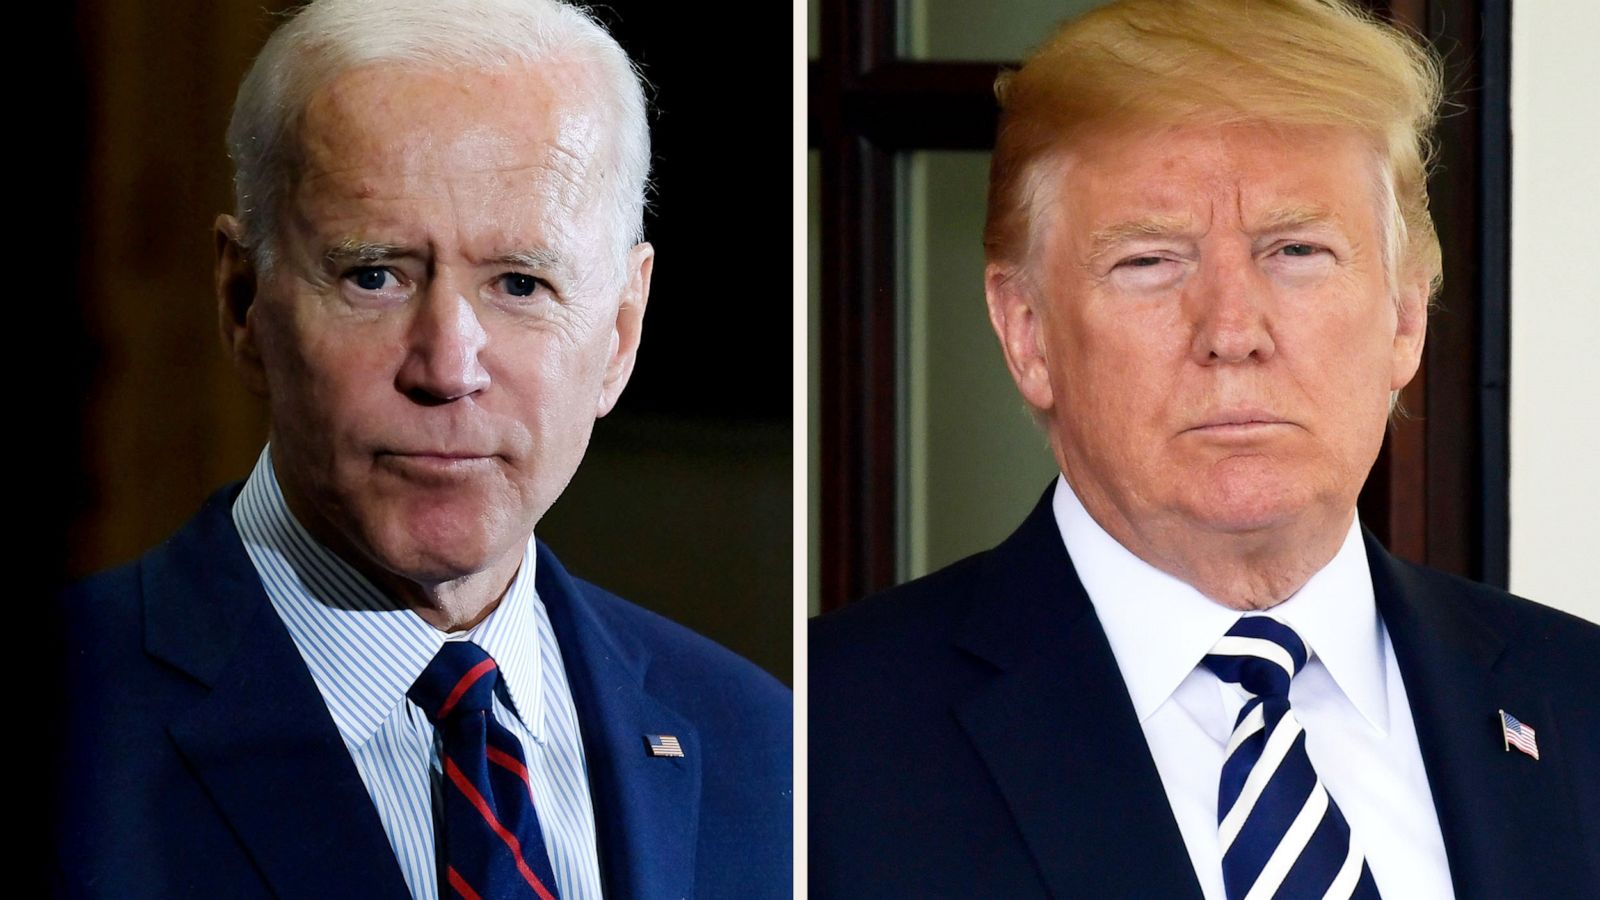 Trump and Biden offer stark difference on pandemic in final push